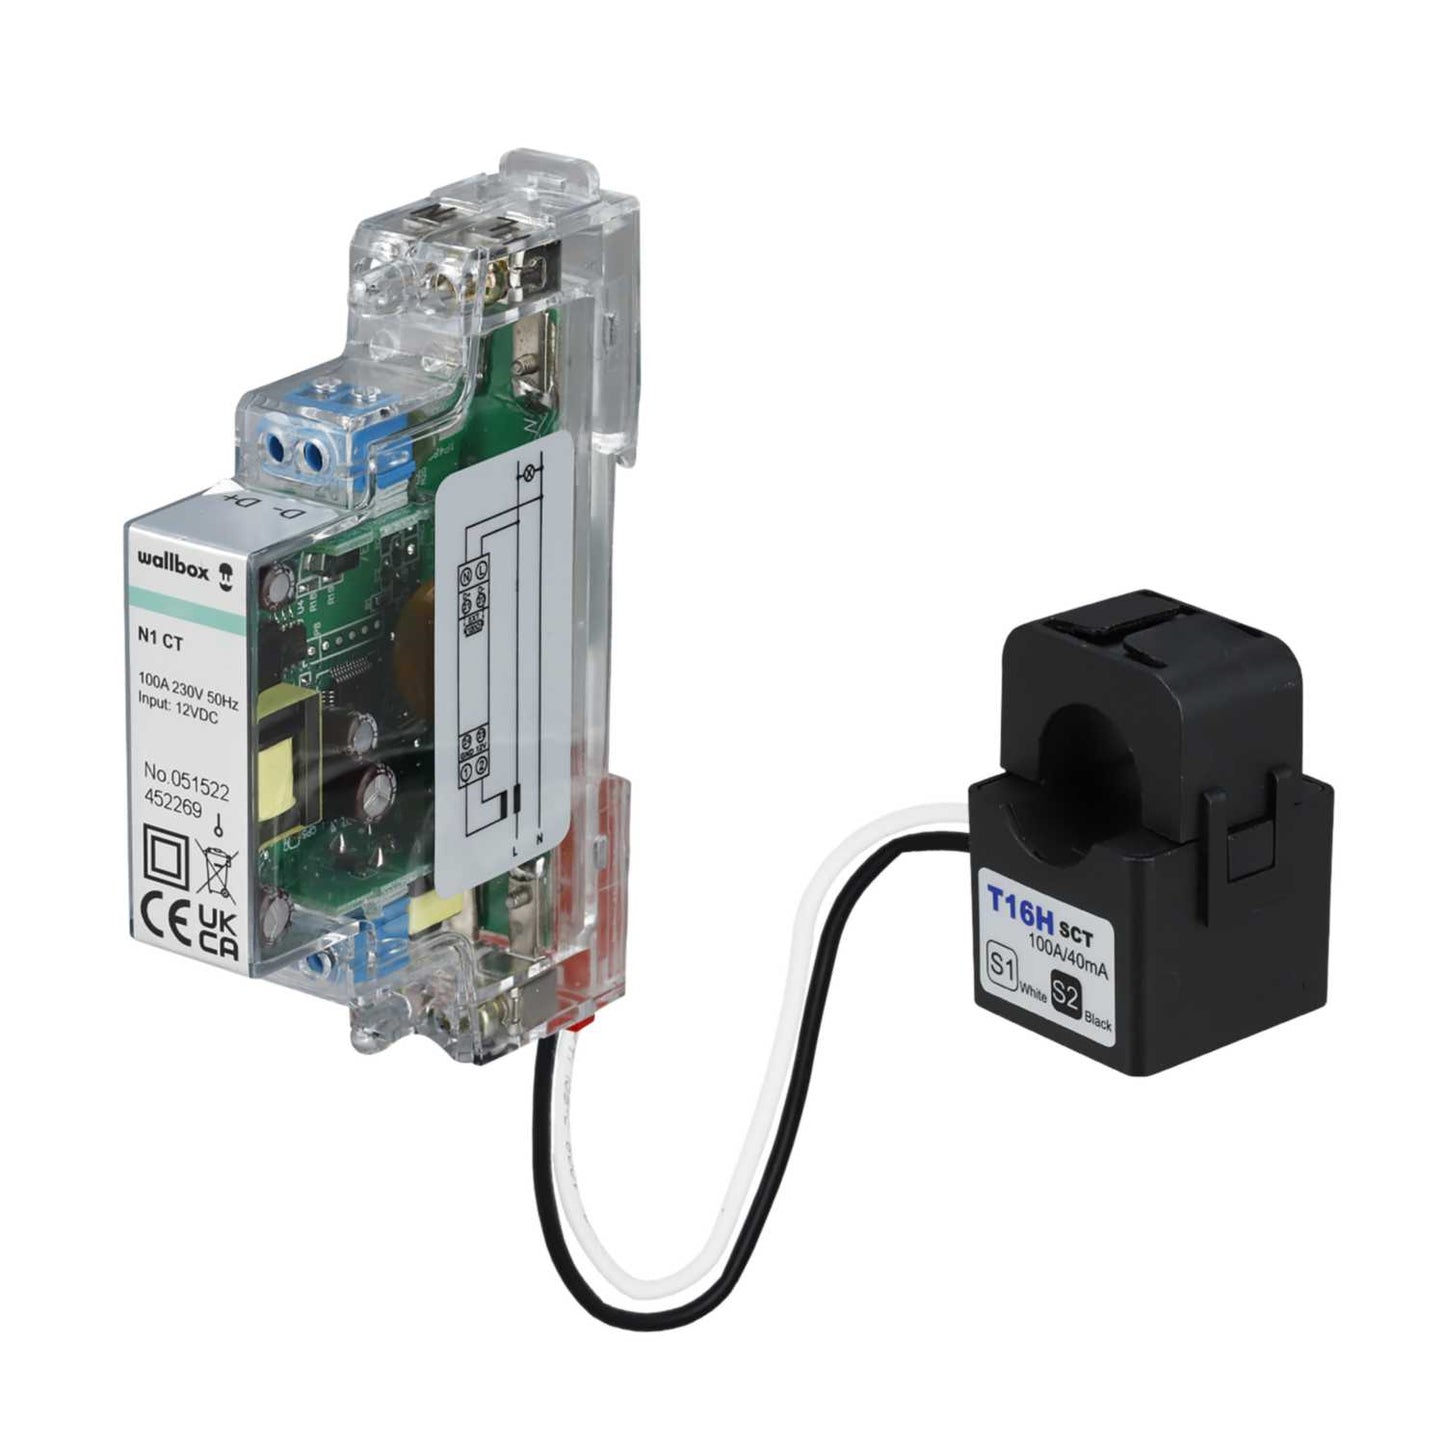 Sensor for Dynamic Power Control Wallbox Power Boost Single-Phase Indirect Measurement up to 80A 